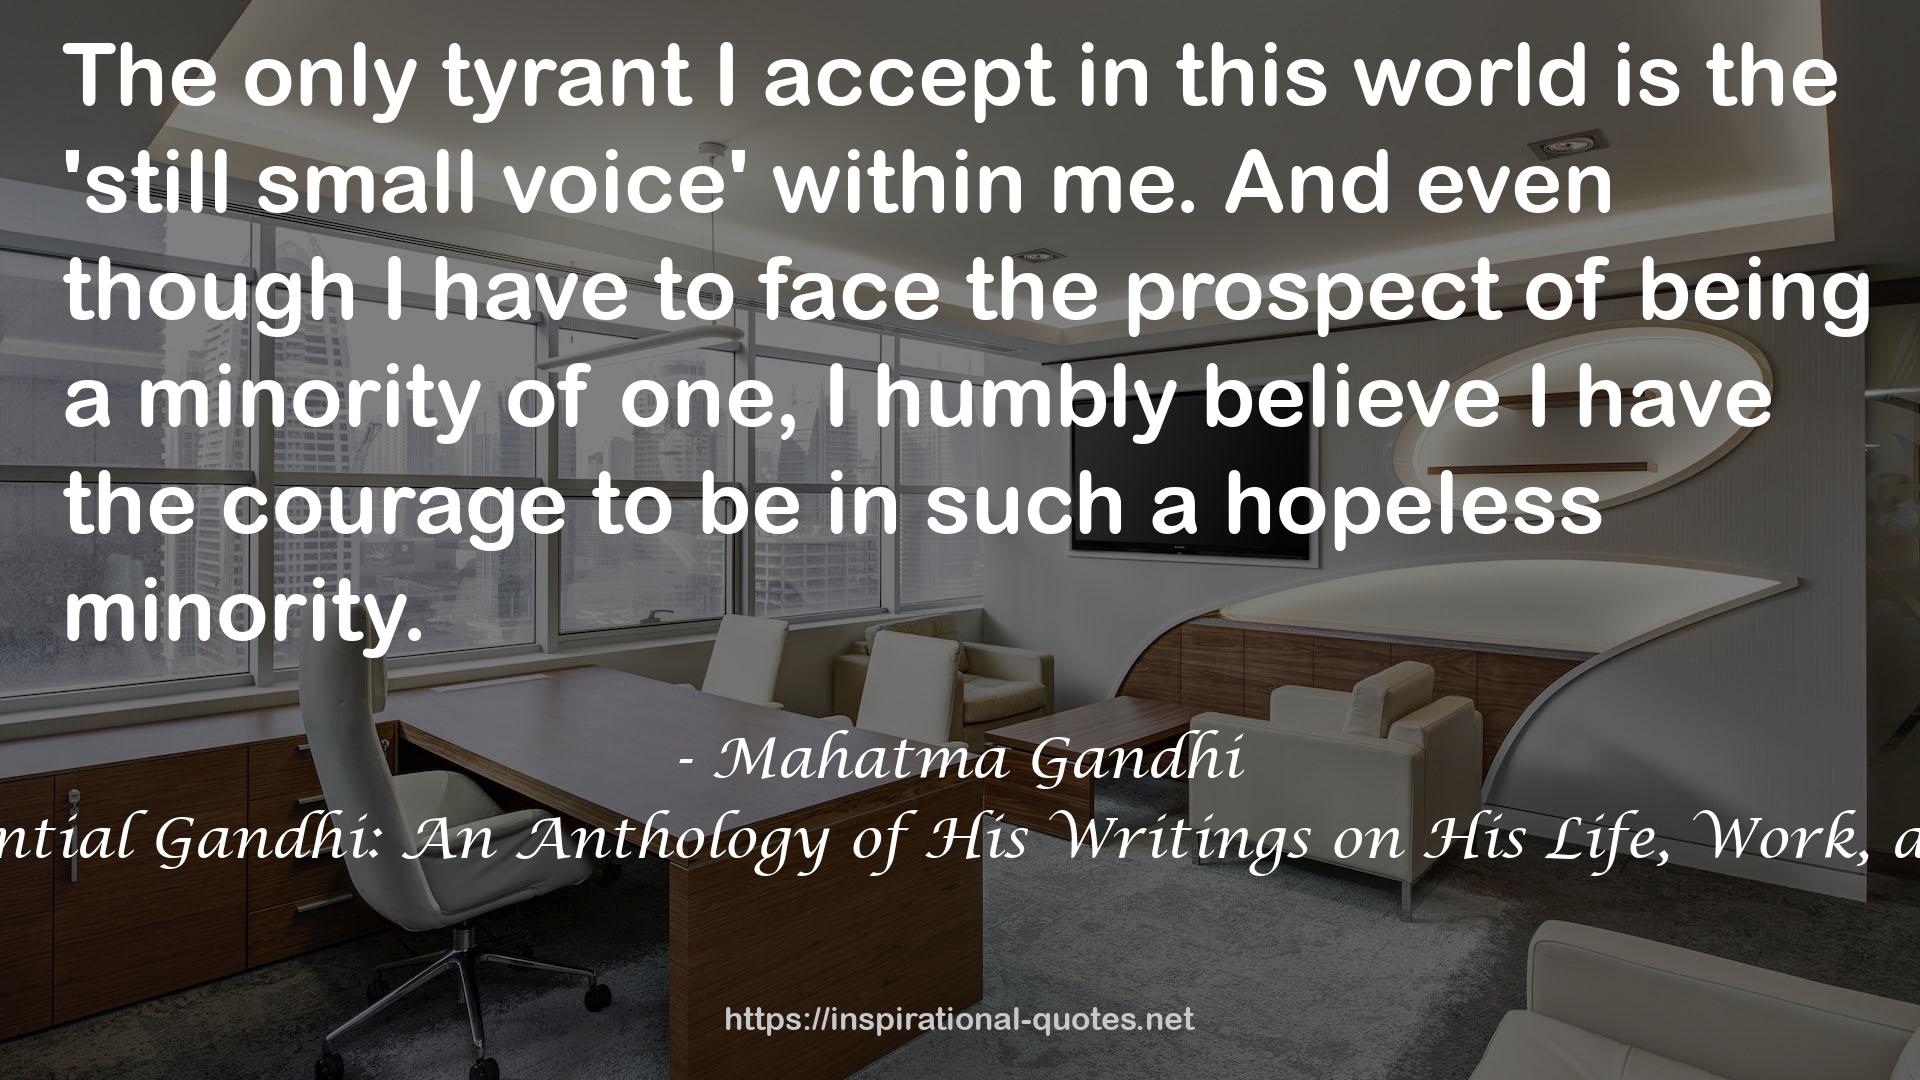 The Essential Gandhi: An Anthology of His Writings on His Life, Work, and Ideas QUOTES